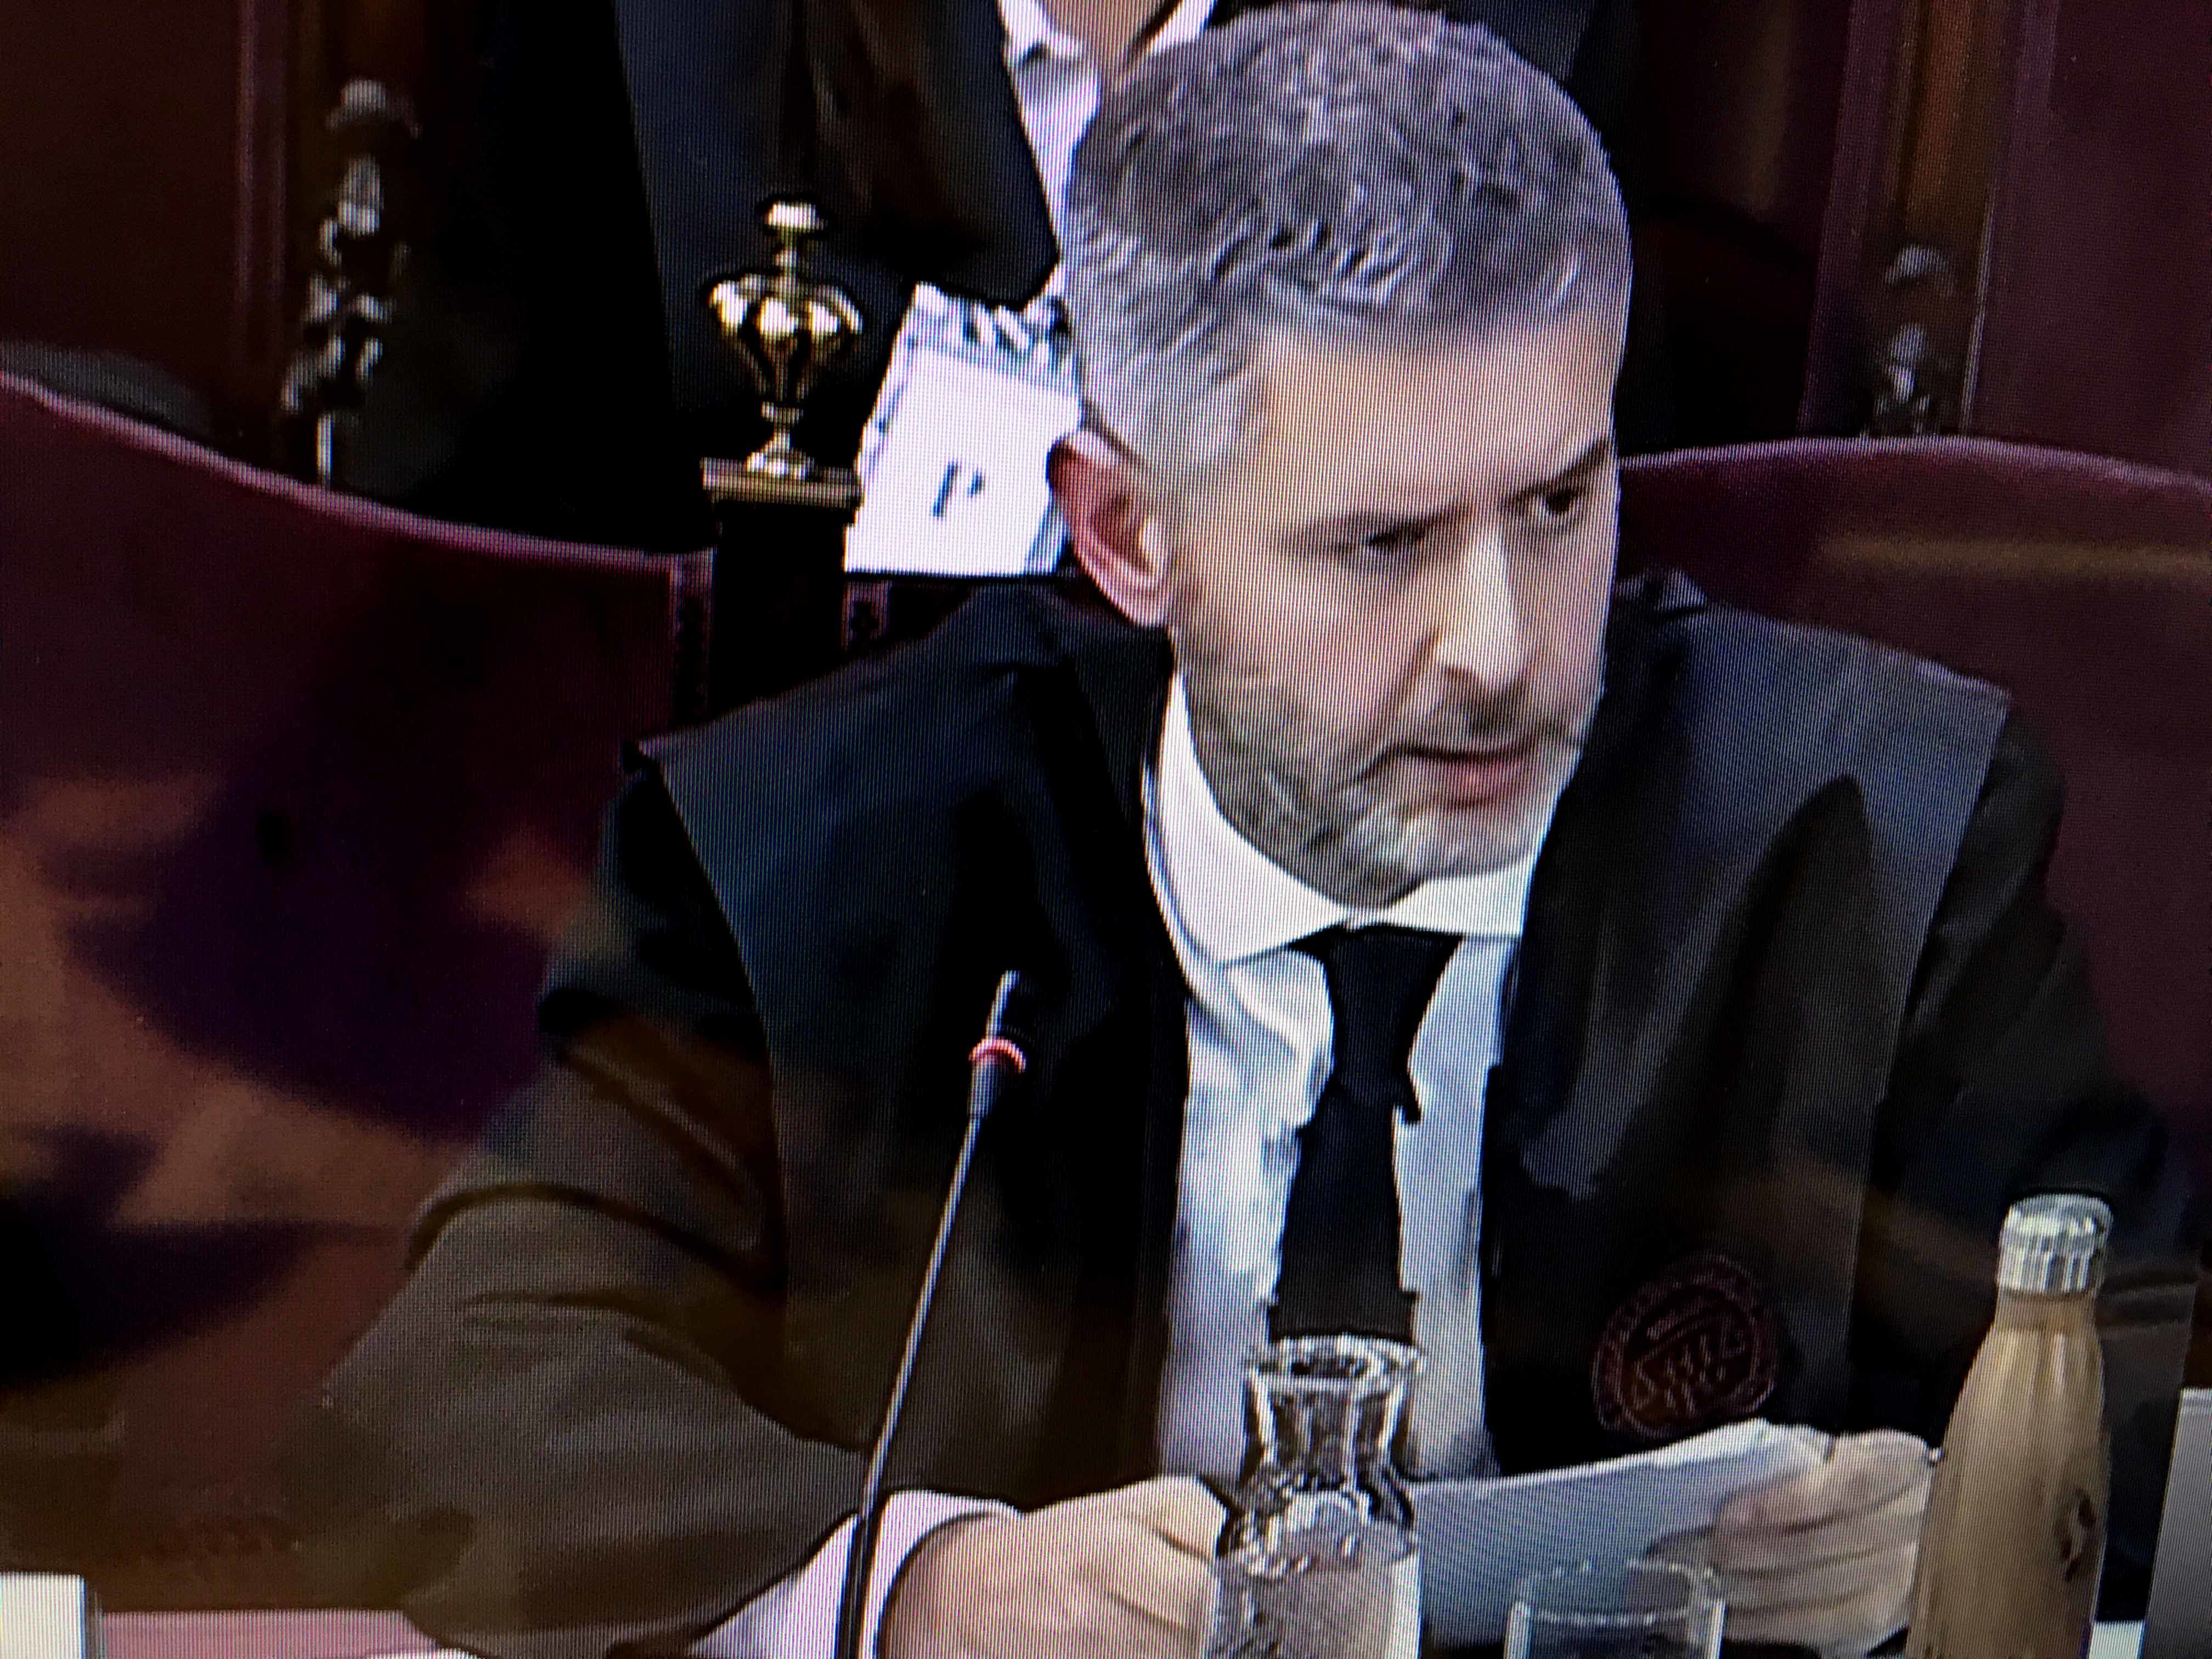 ​Andreu Van den Eynde, lawyer for Oriol Junqueras and Raül Romeva, opened defence attacks on the injustices of the trial process